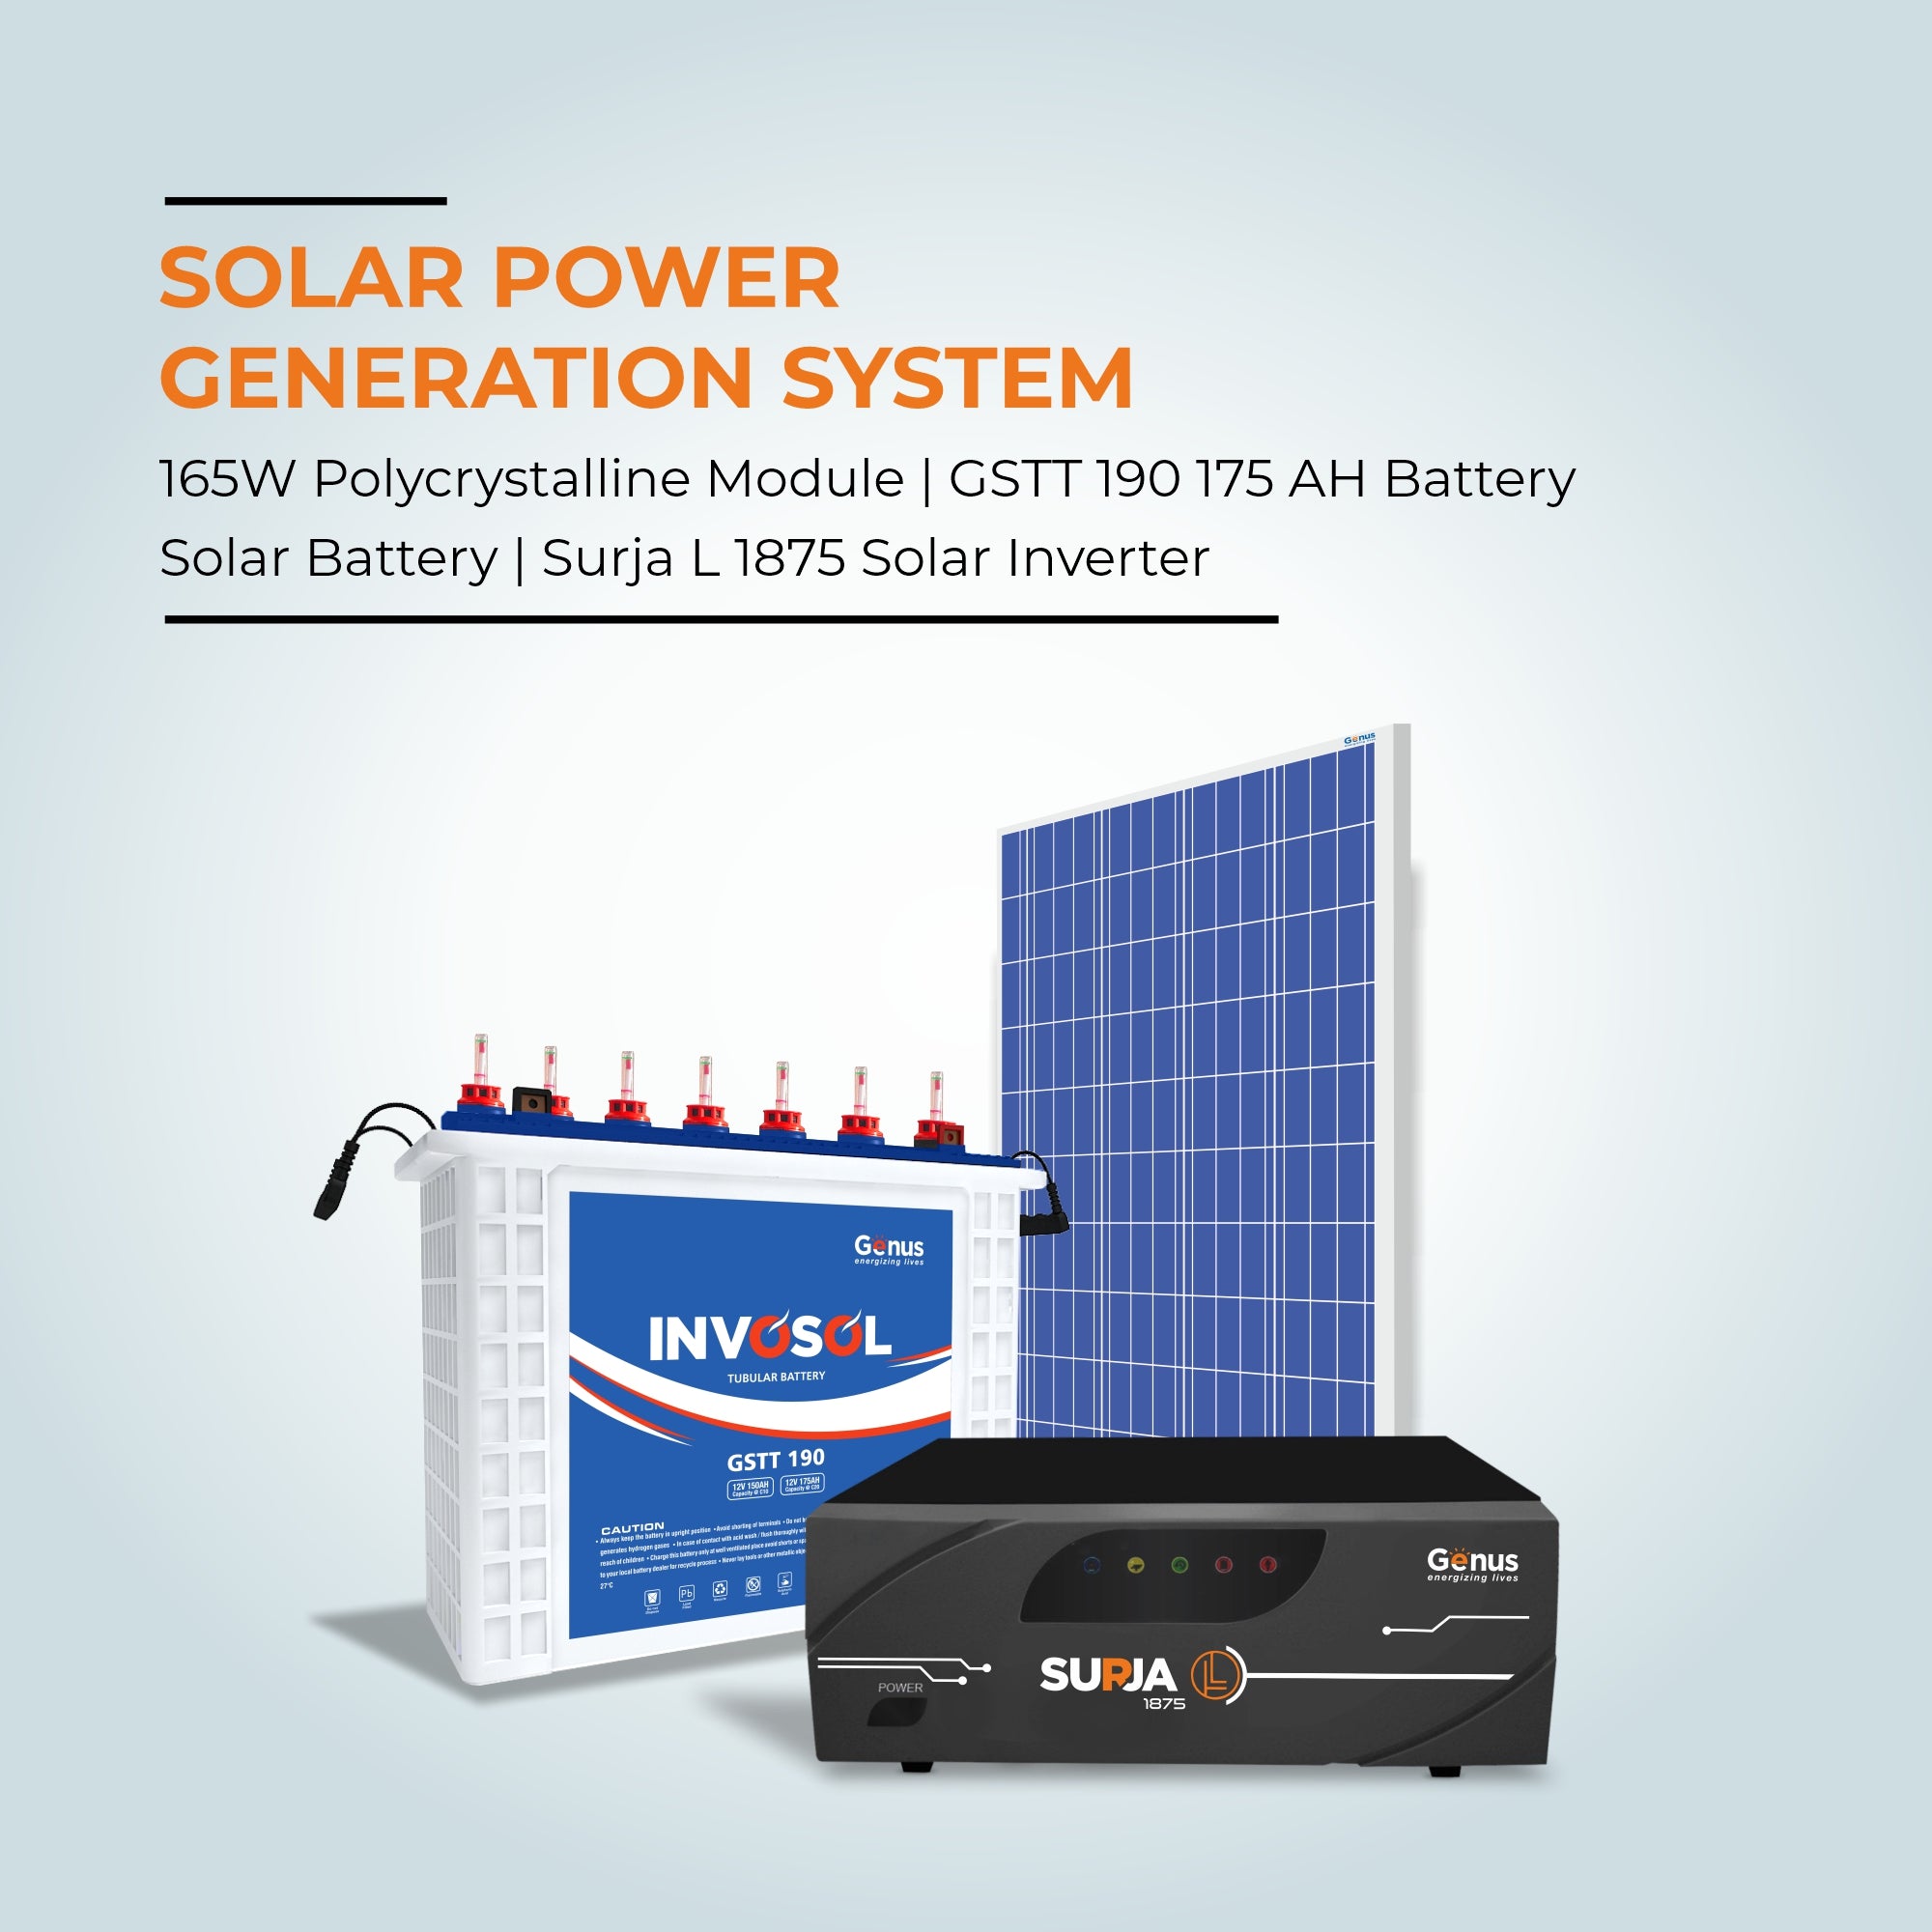 Buy Power-One Solar Inverter Online, Get Up-to 40% Off